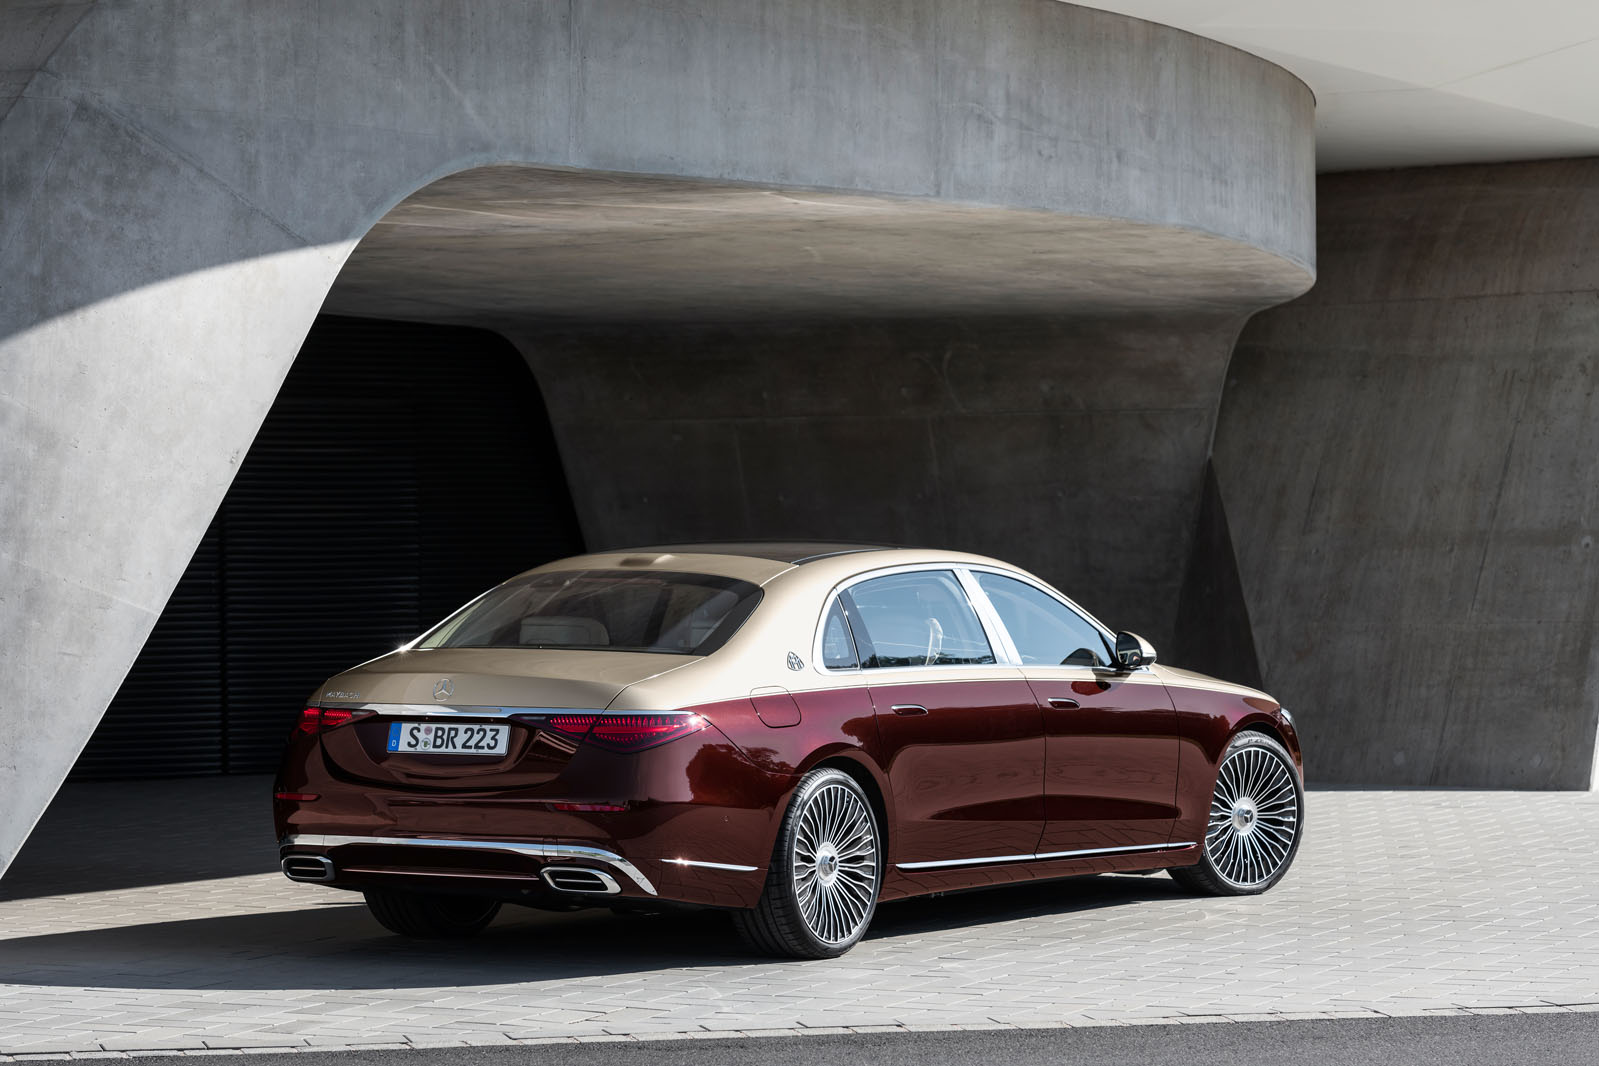 New 2021 Mercedes-Maybach S-Class revealed as ultra-luxury flagship |  Autocar